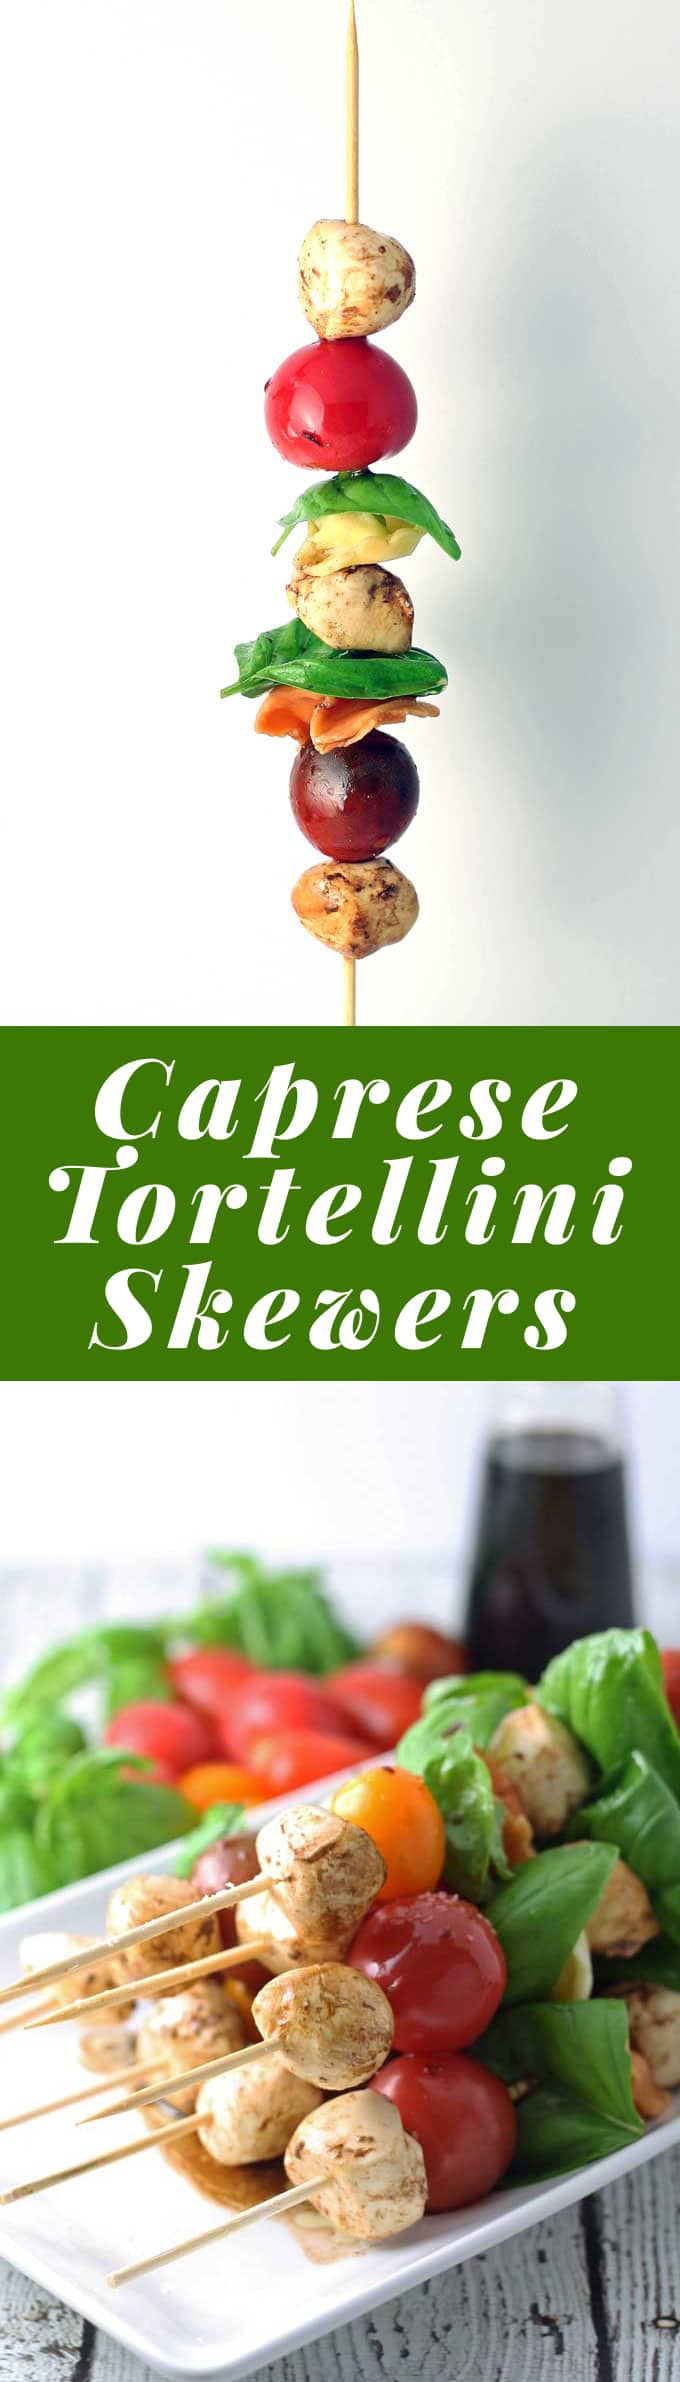 Caprese Tortellini Skewers are a fun appetizer on a stick! Perfect for parties and barbecues. | honeyandbirch.com